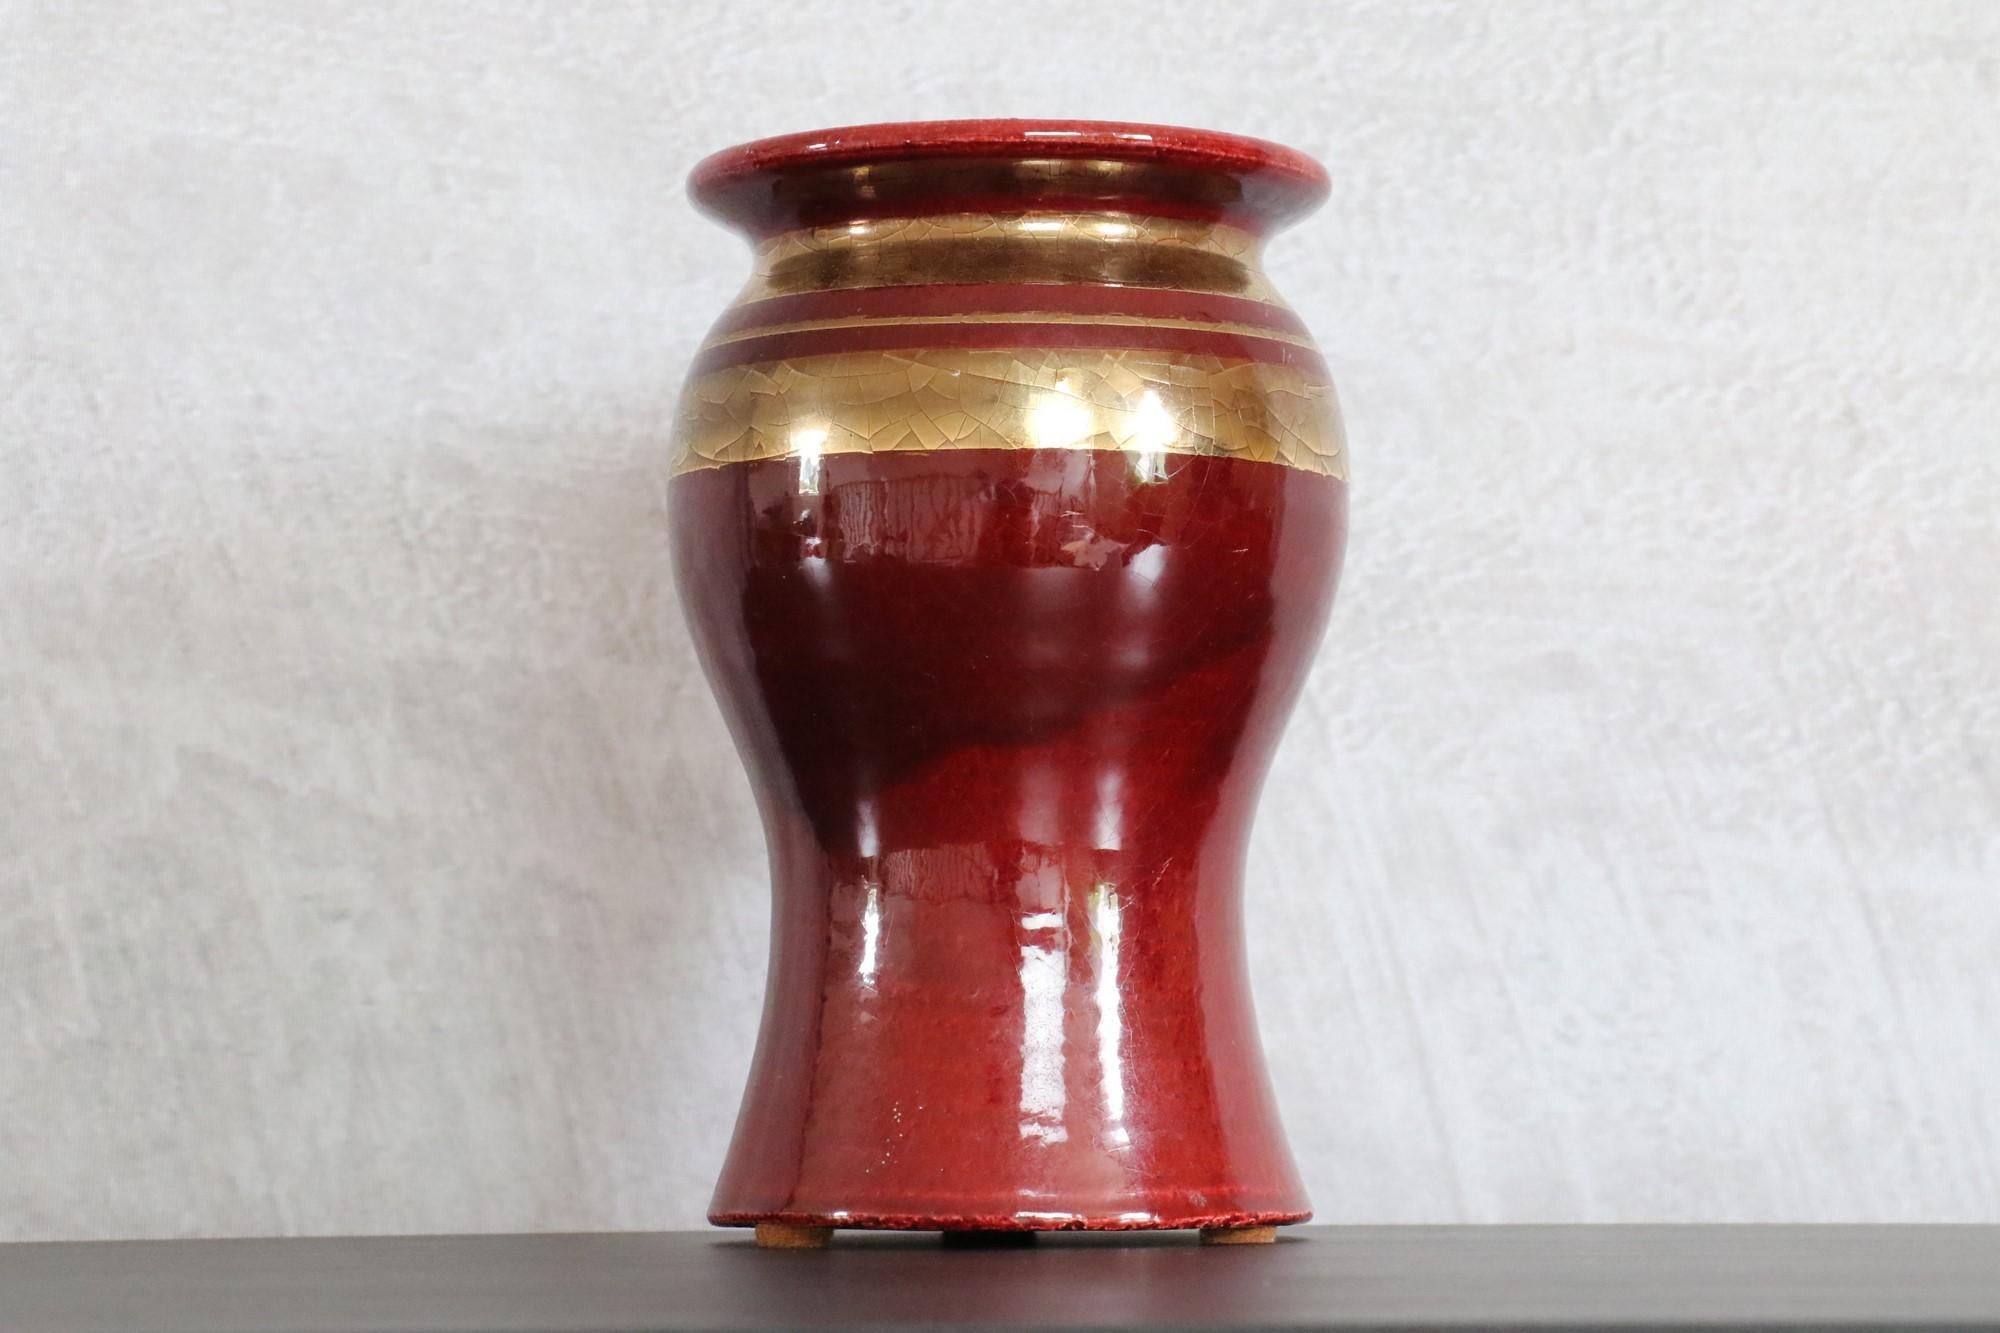 French ceramic red and golden vase by Georges Pelletier, Signed, 1970s.

The ceramic proposed here has an attractive design in deep shades of gold and red. Handmade, it is glazed with a glossy crackle finish. The piece is signed on the